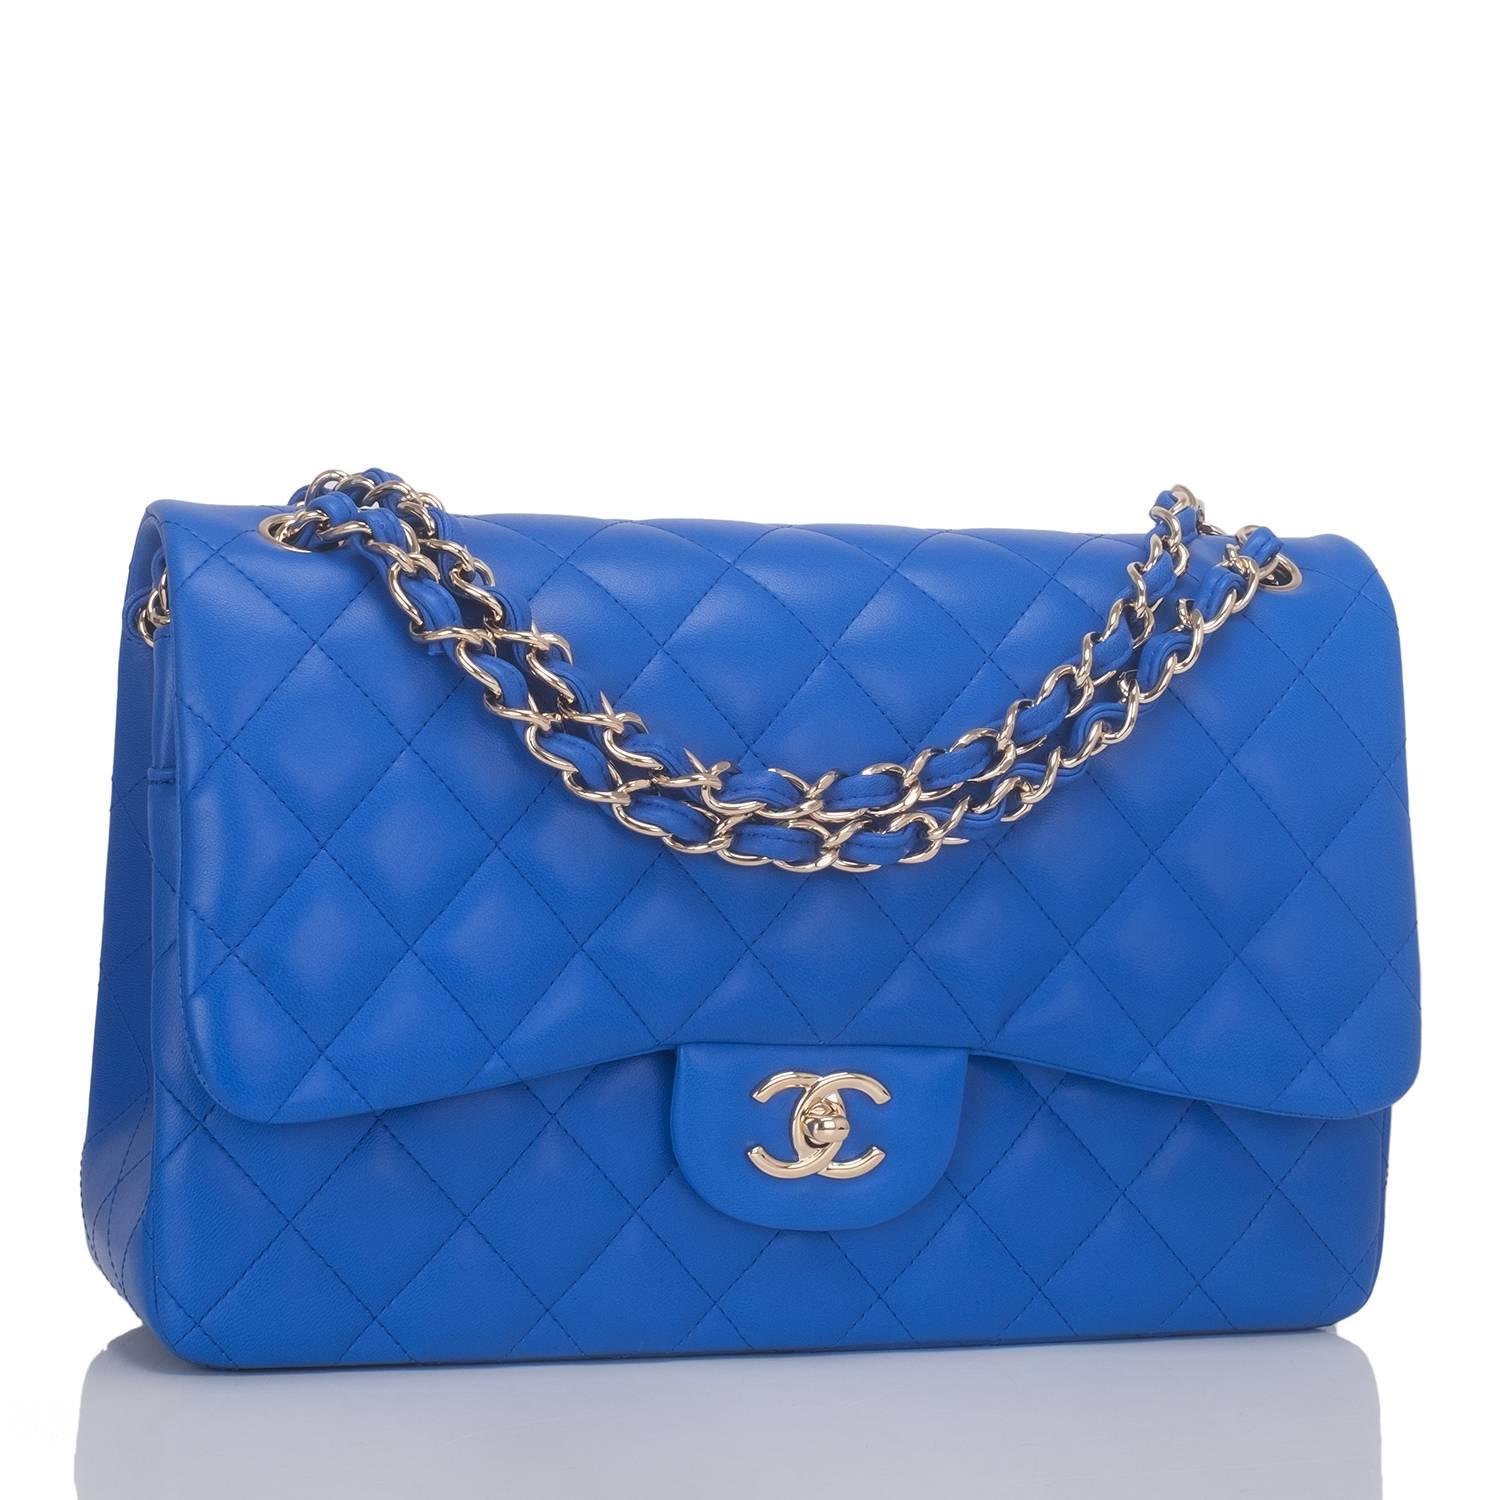 Chanel Jumbo Classic double flap bag of blue lambskin leather and light gold tone hardware.

This bag features a front flap with signature CC turnlock closure, a half moon back pocket, and an adjustable interwoven chain link with blue lambskin